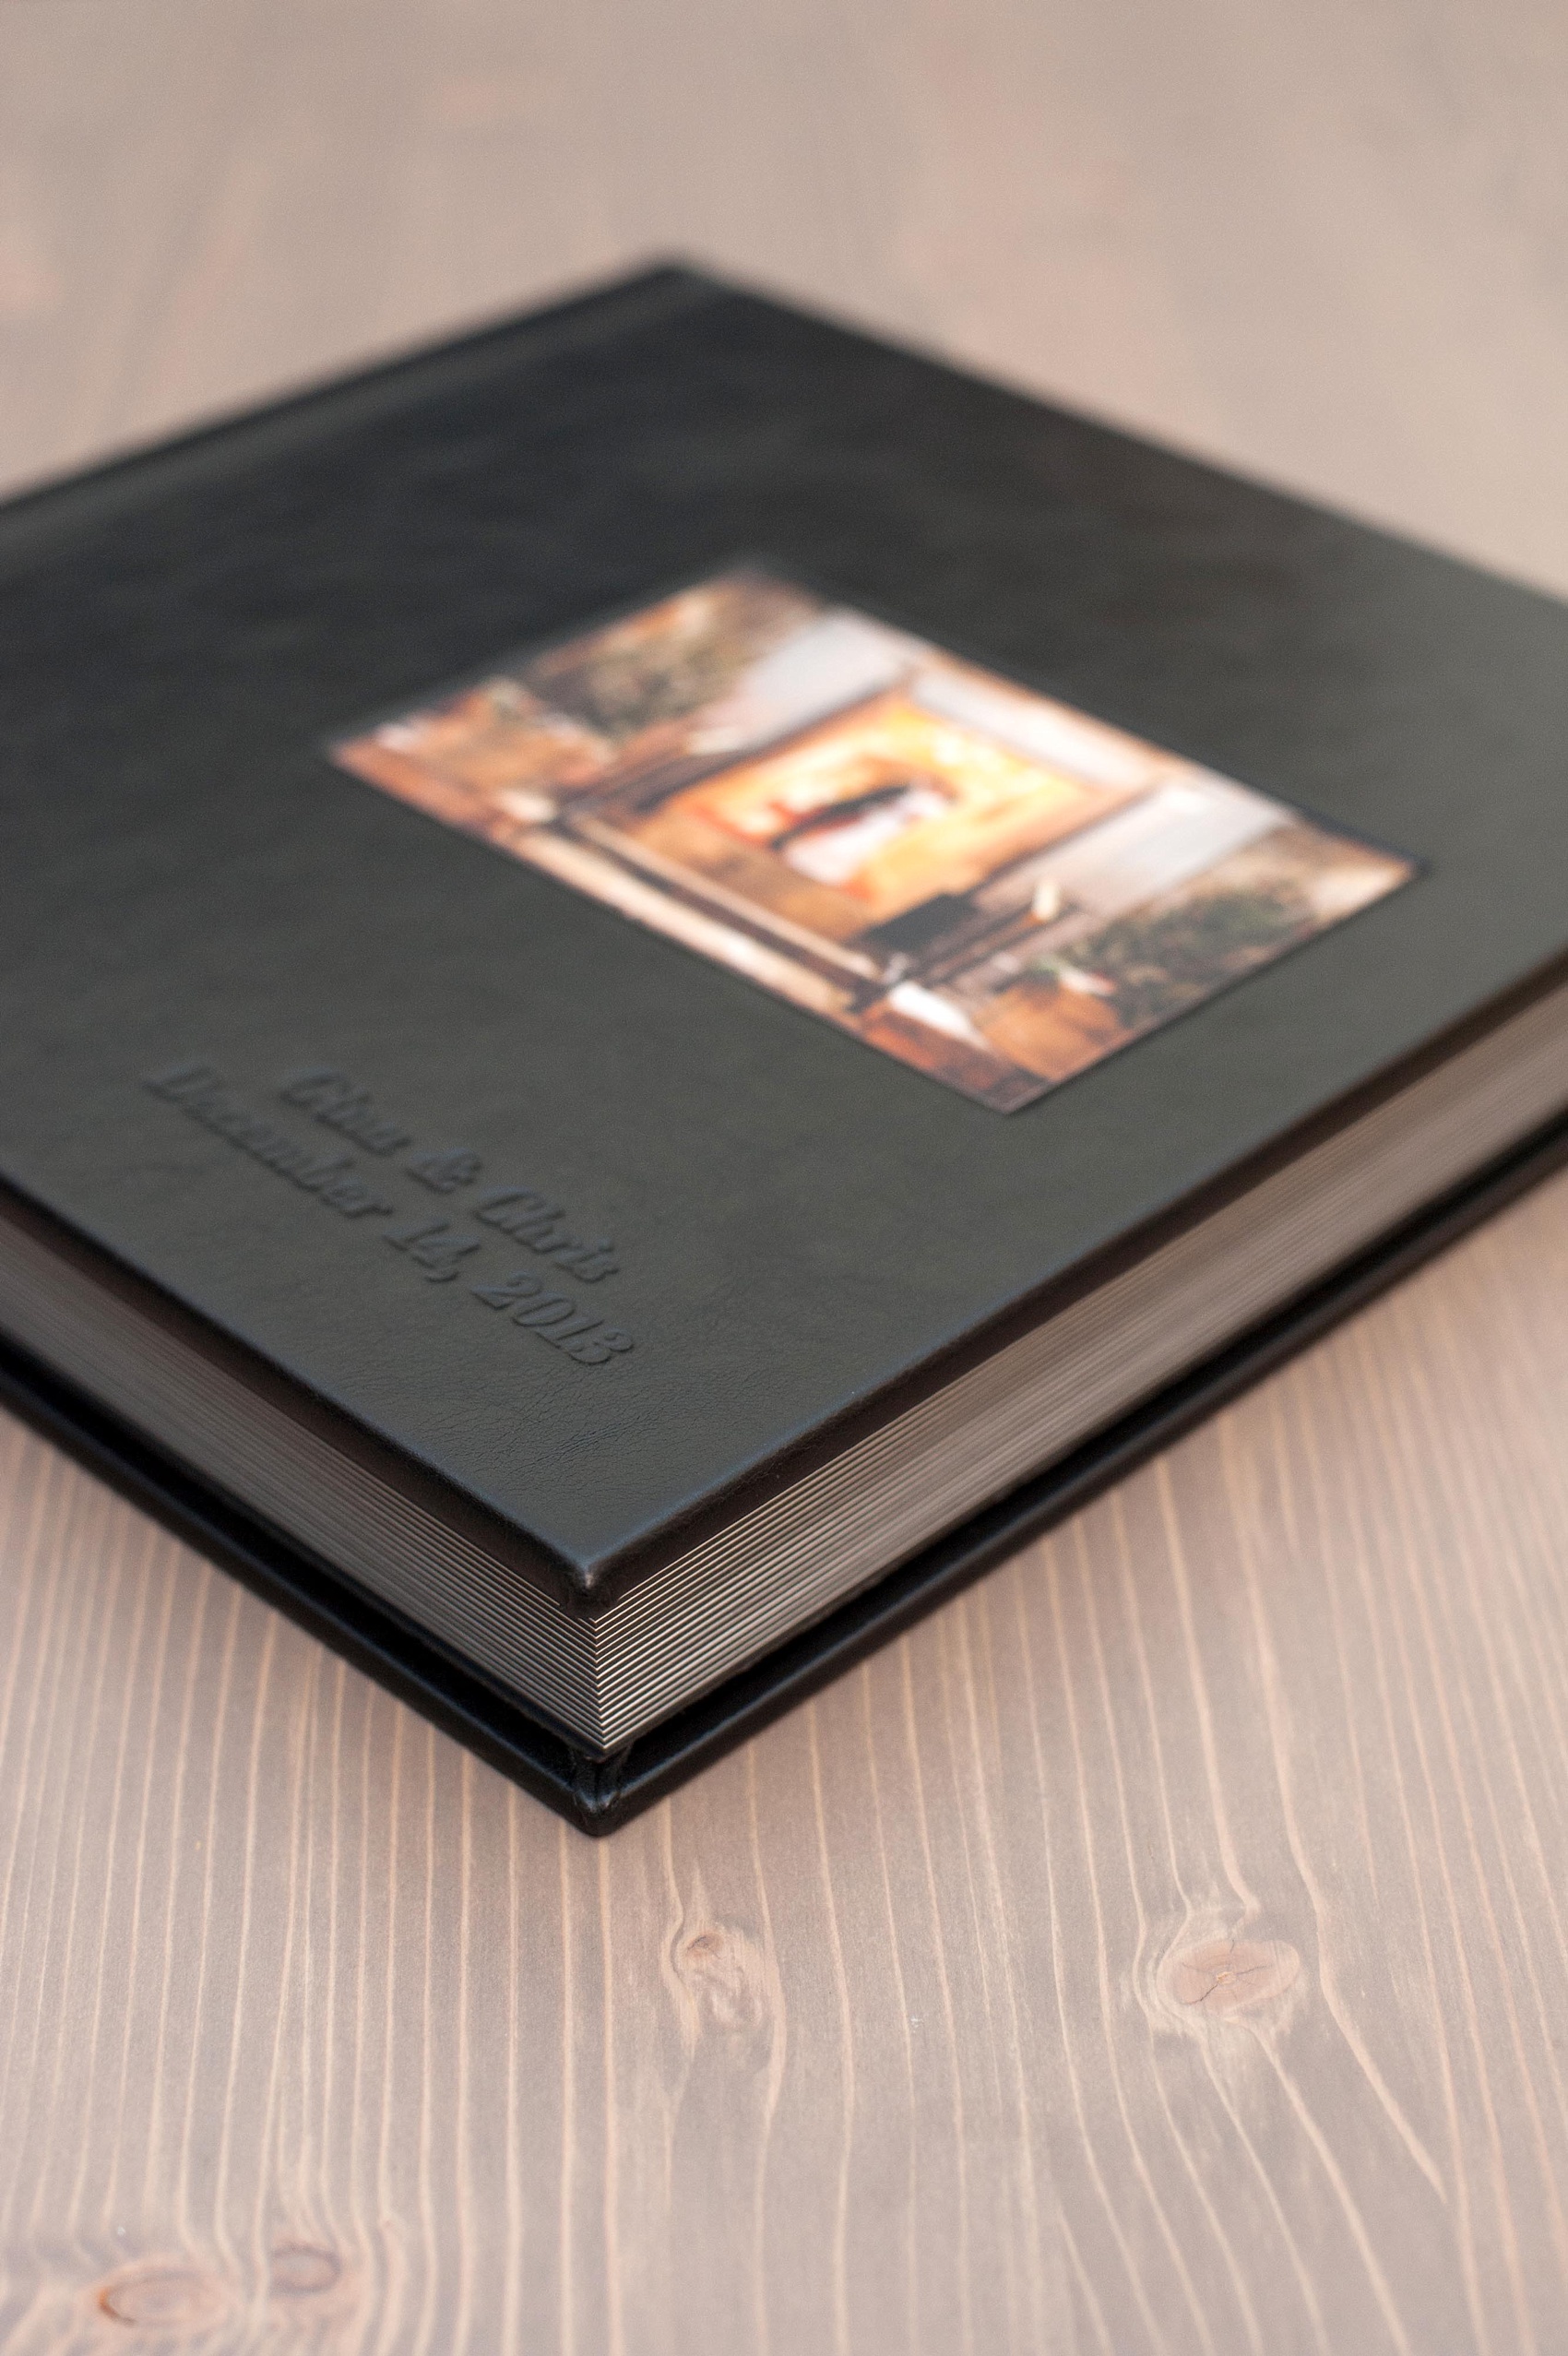 Mikkel Paige Photography black leather, fine-art wedding album option with cover debossing and inset photo.